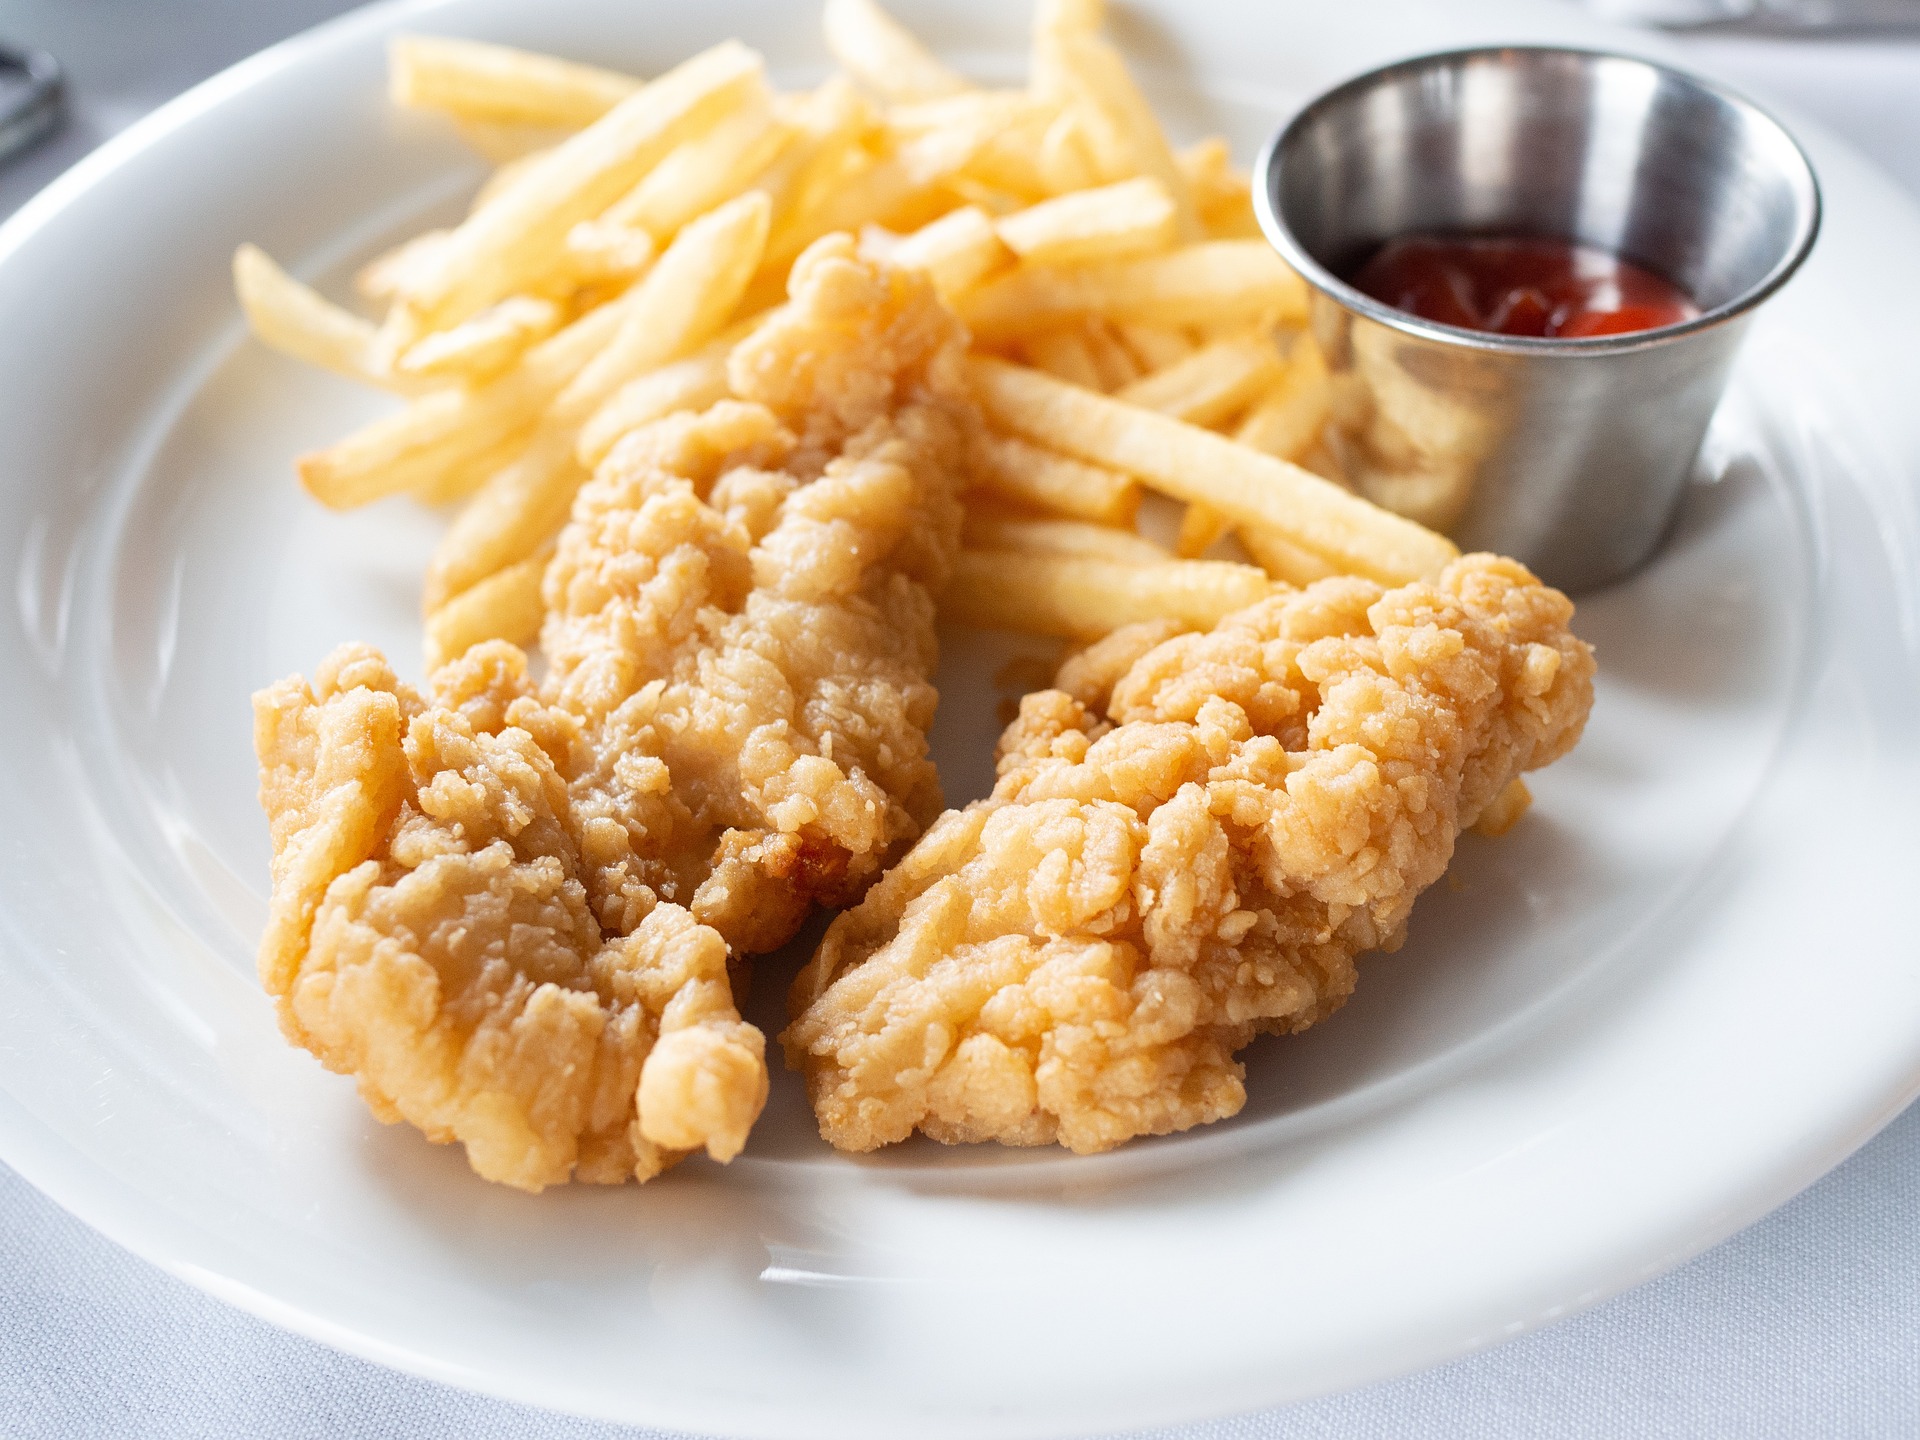 Chicken Tenders and French fries